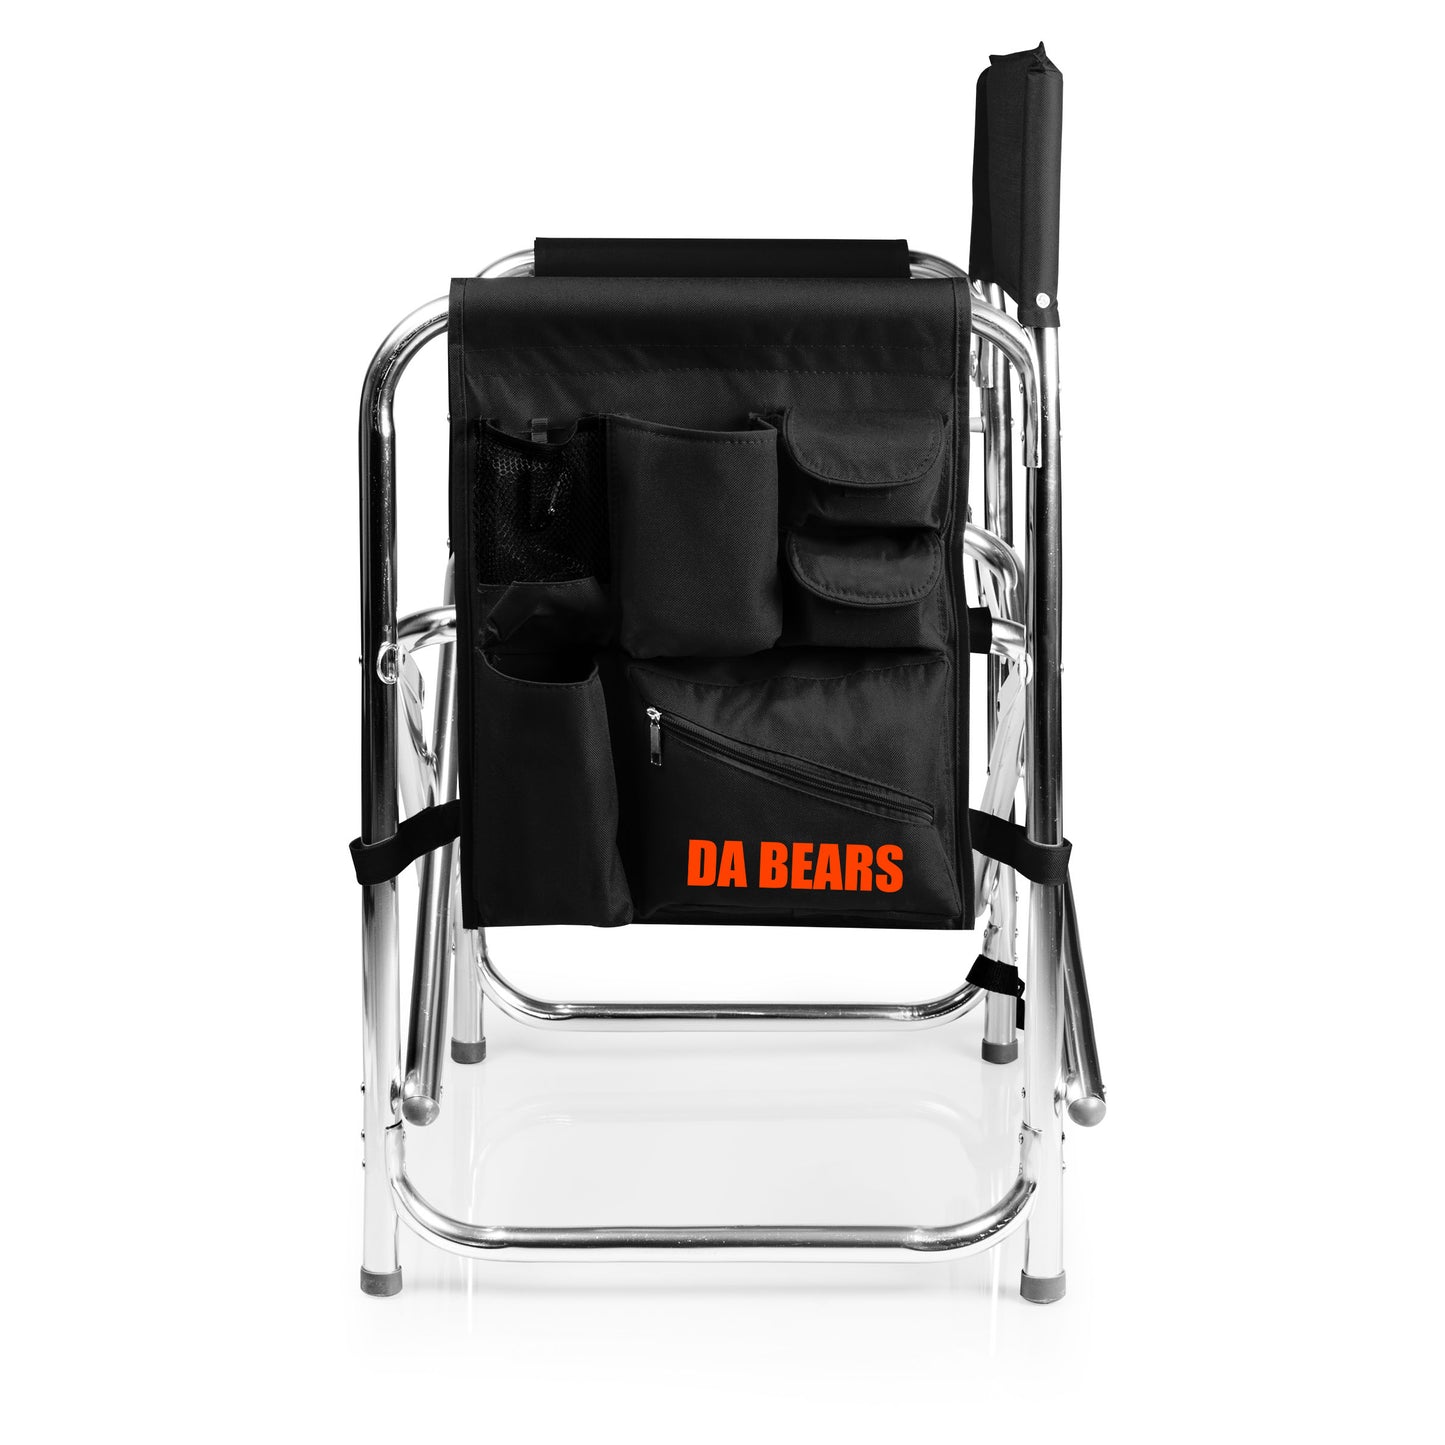 Chicago Bears - Sports Chair